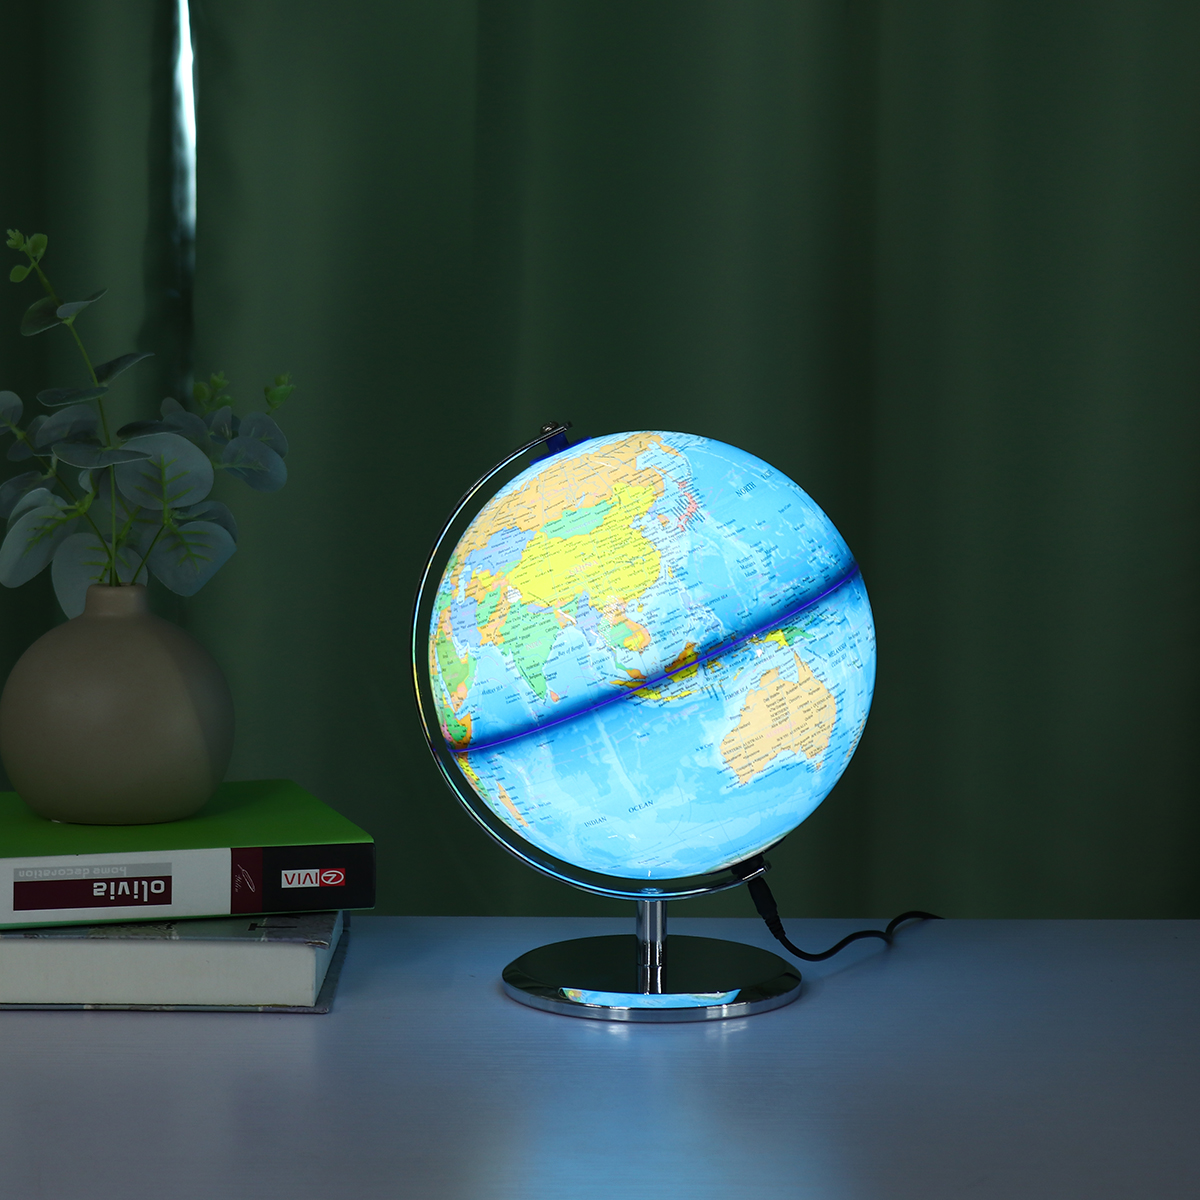 8inch-Stand-Rotating-World-Globe-Map-Kids-Toy-School-Student-Educational-Gift-1783975-3